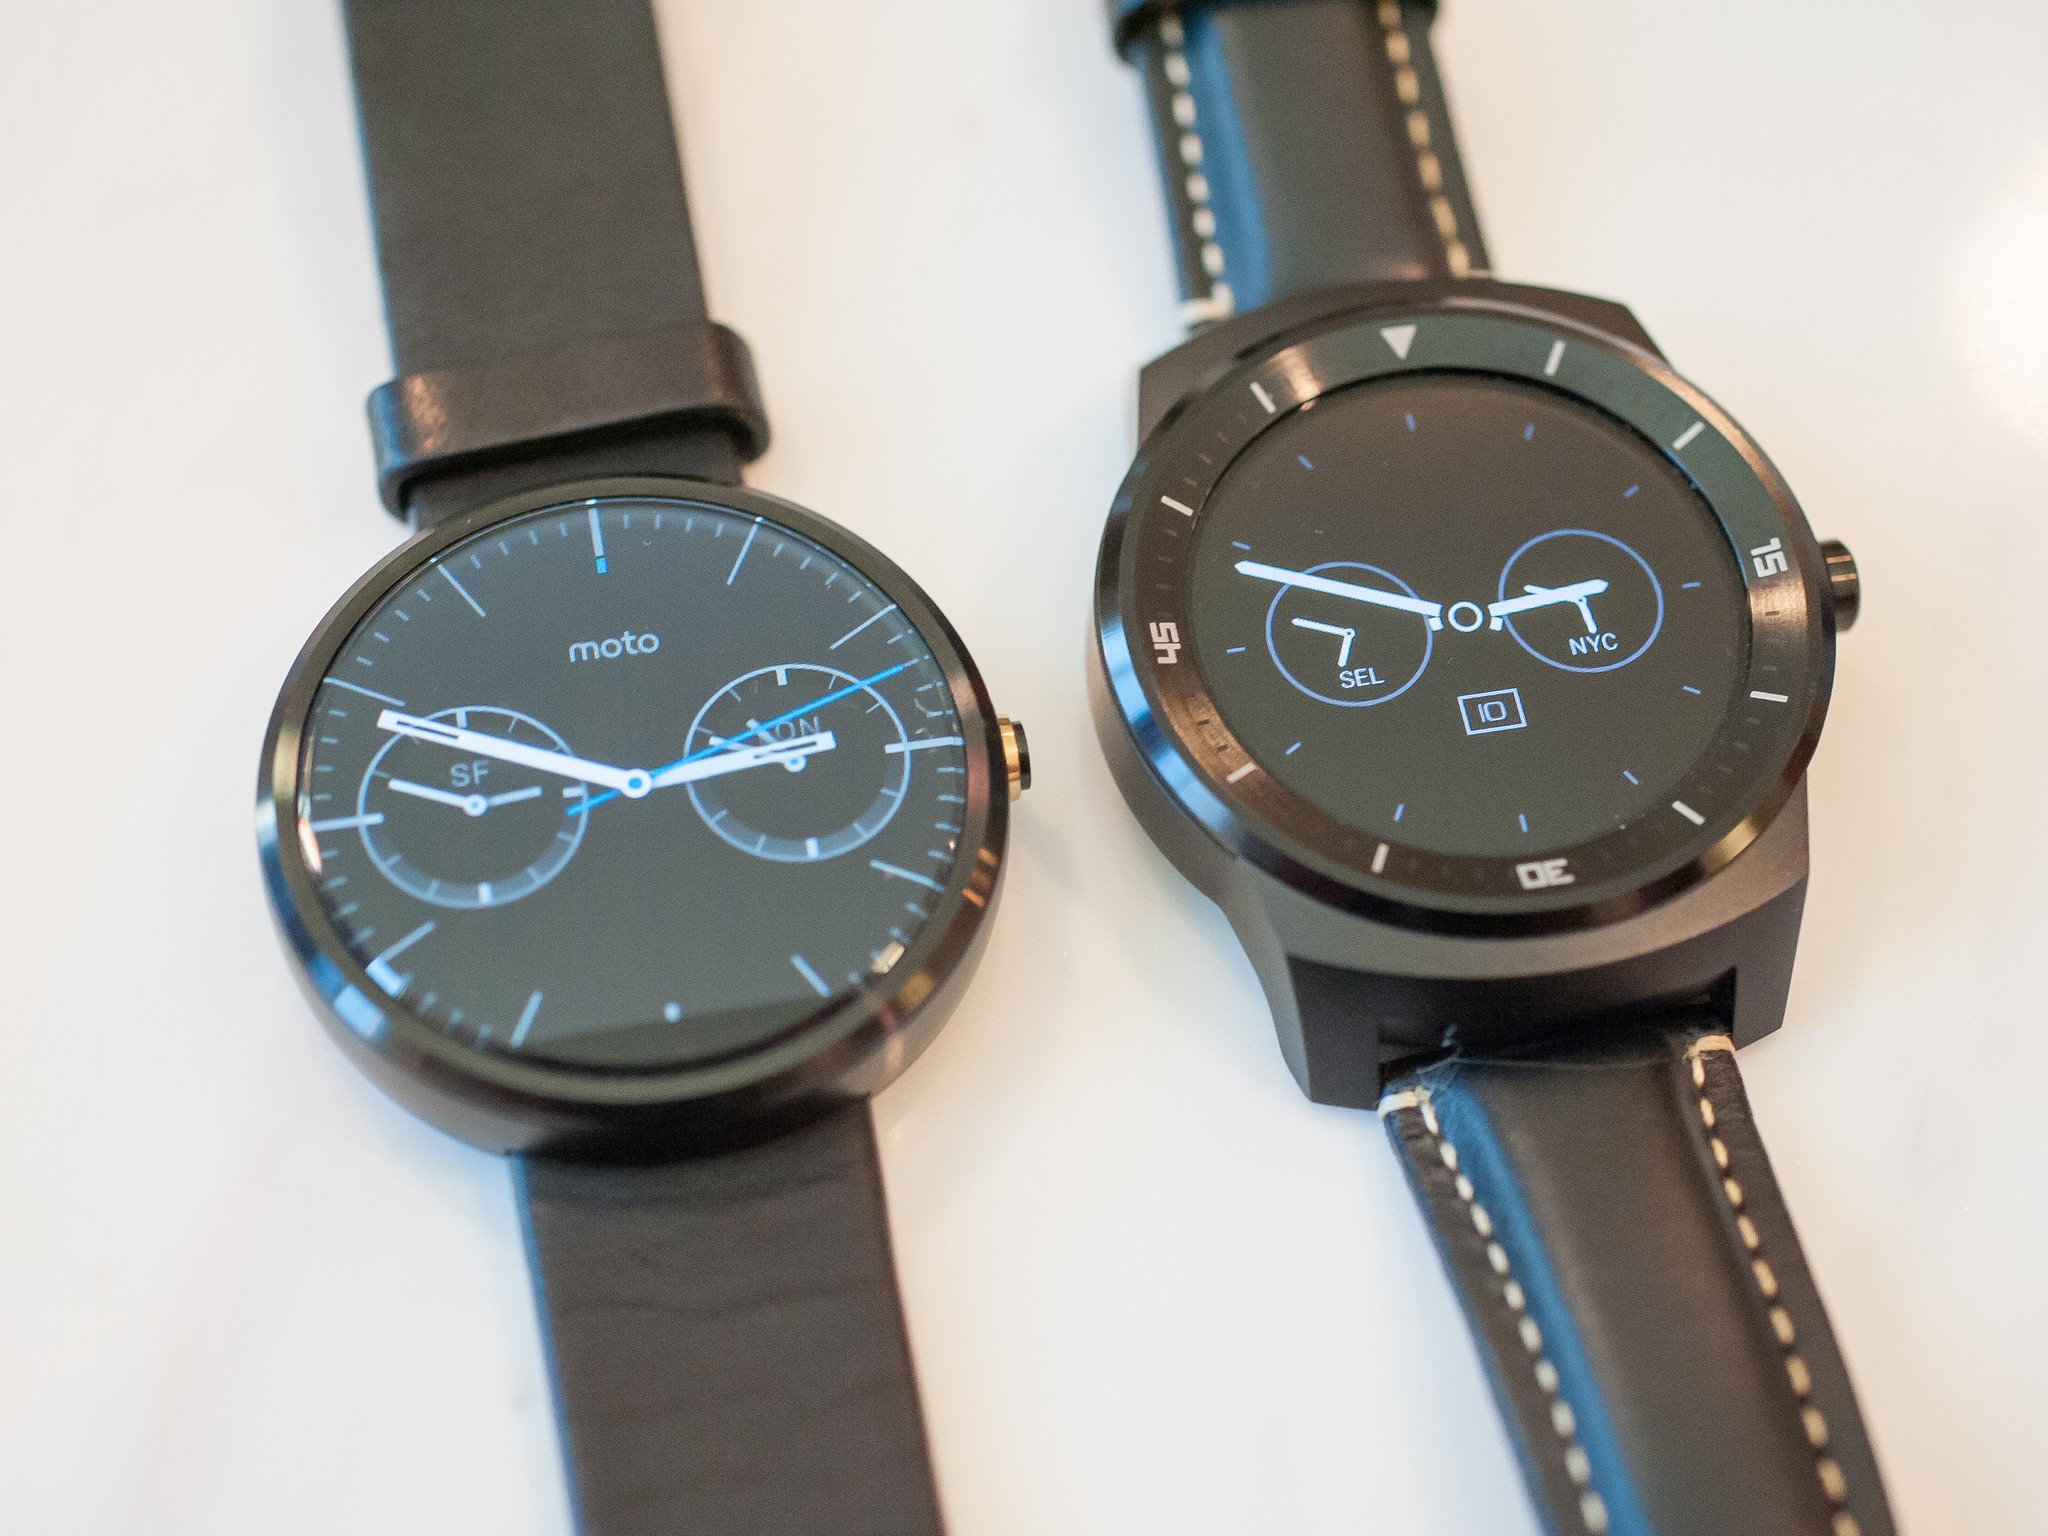 LG G Watch R and Moto 360 get price cuts on the Google Store